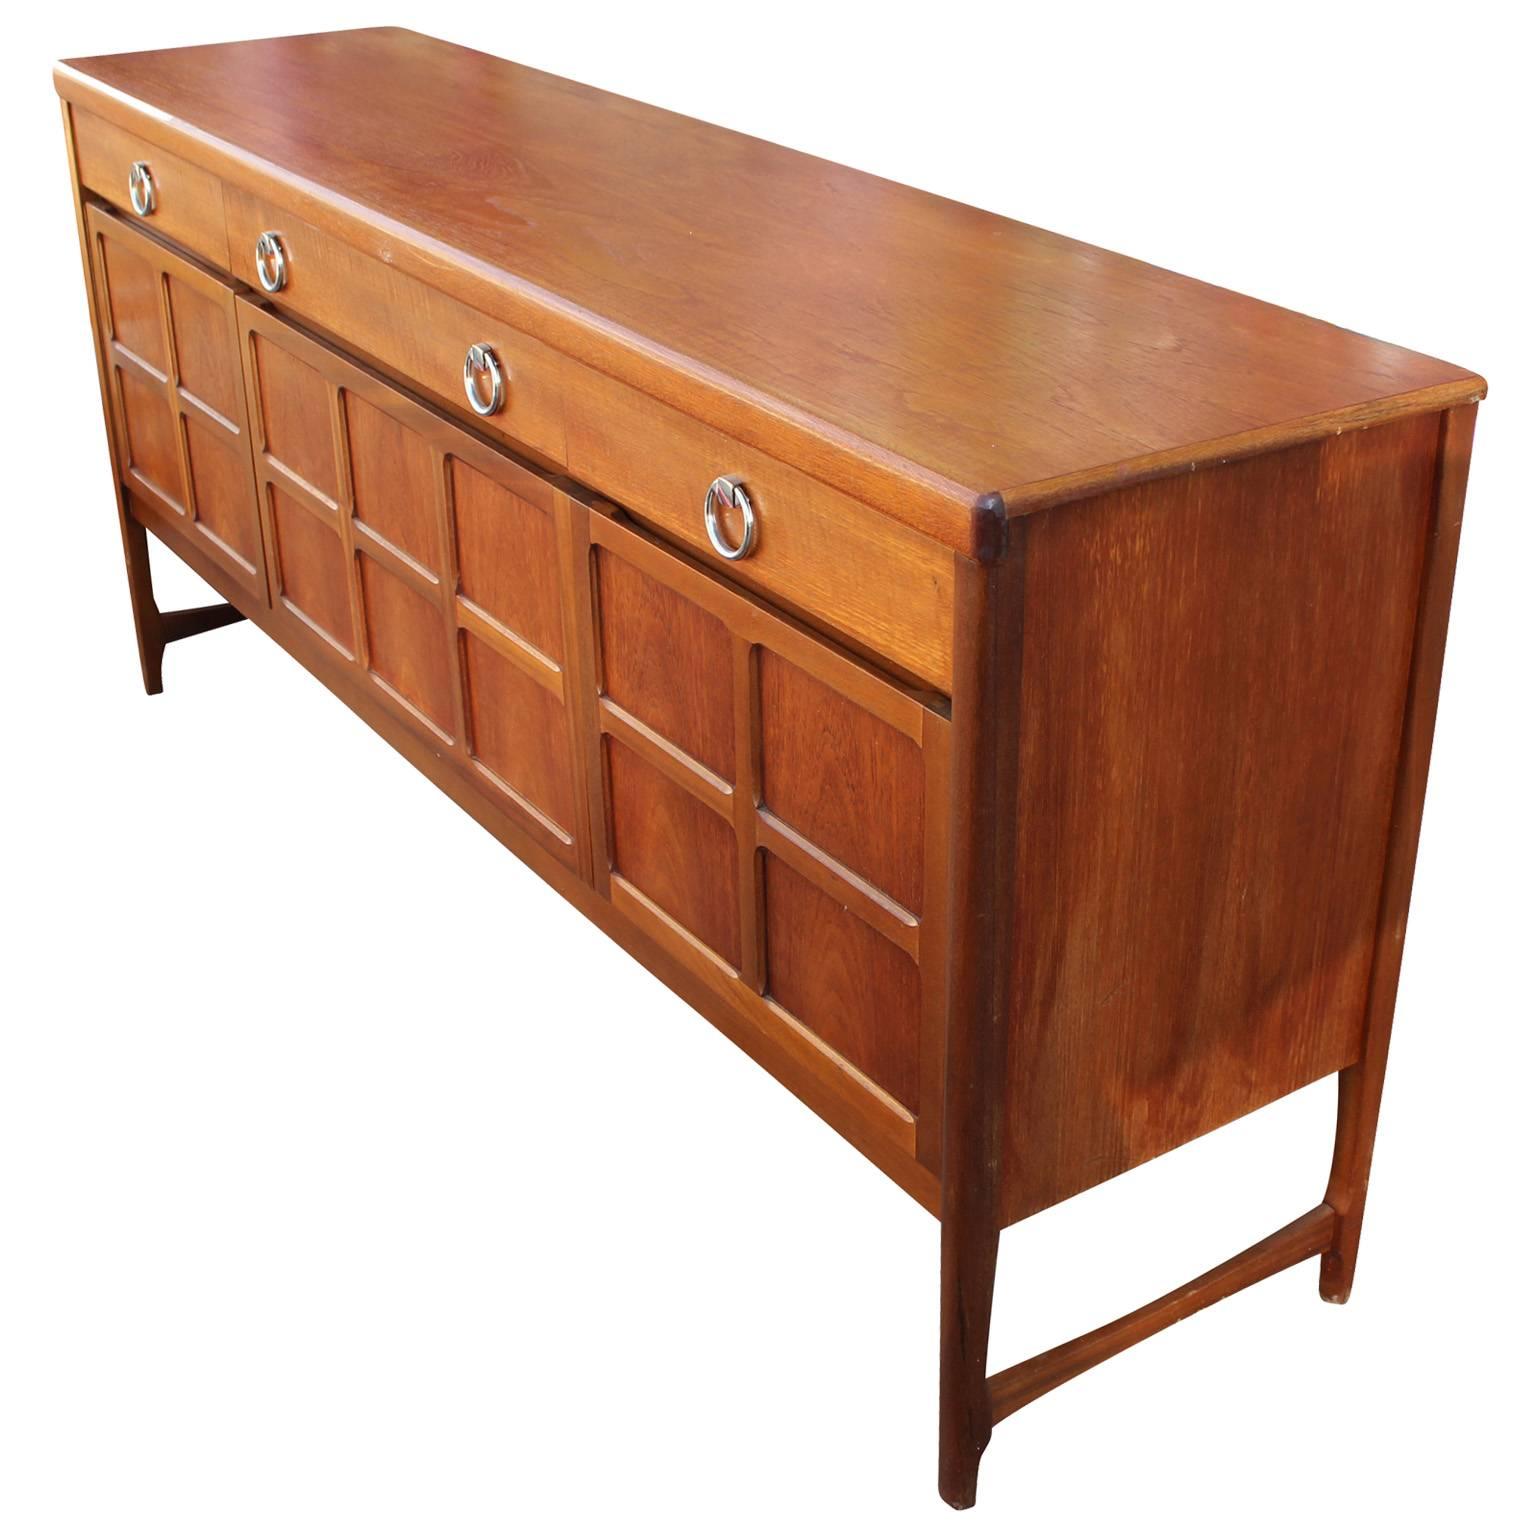 Mid-Century Modern Handsome Mid Century Modern Mahgony and Teak Sideboard with Chrome Hardware